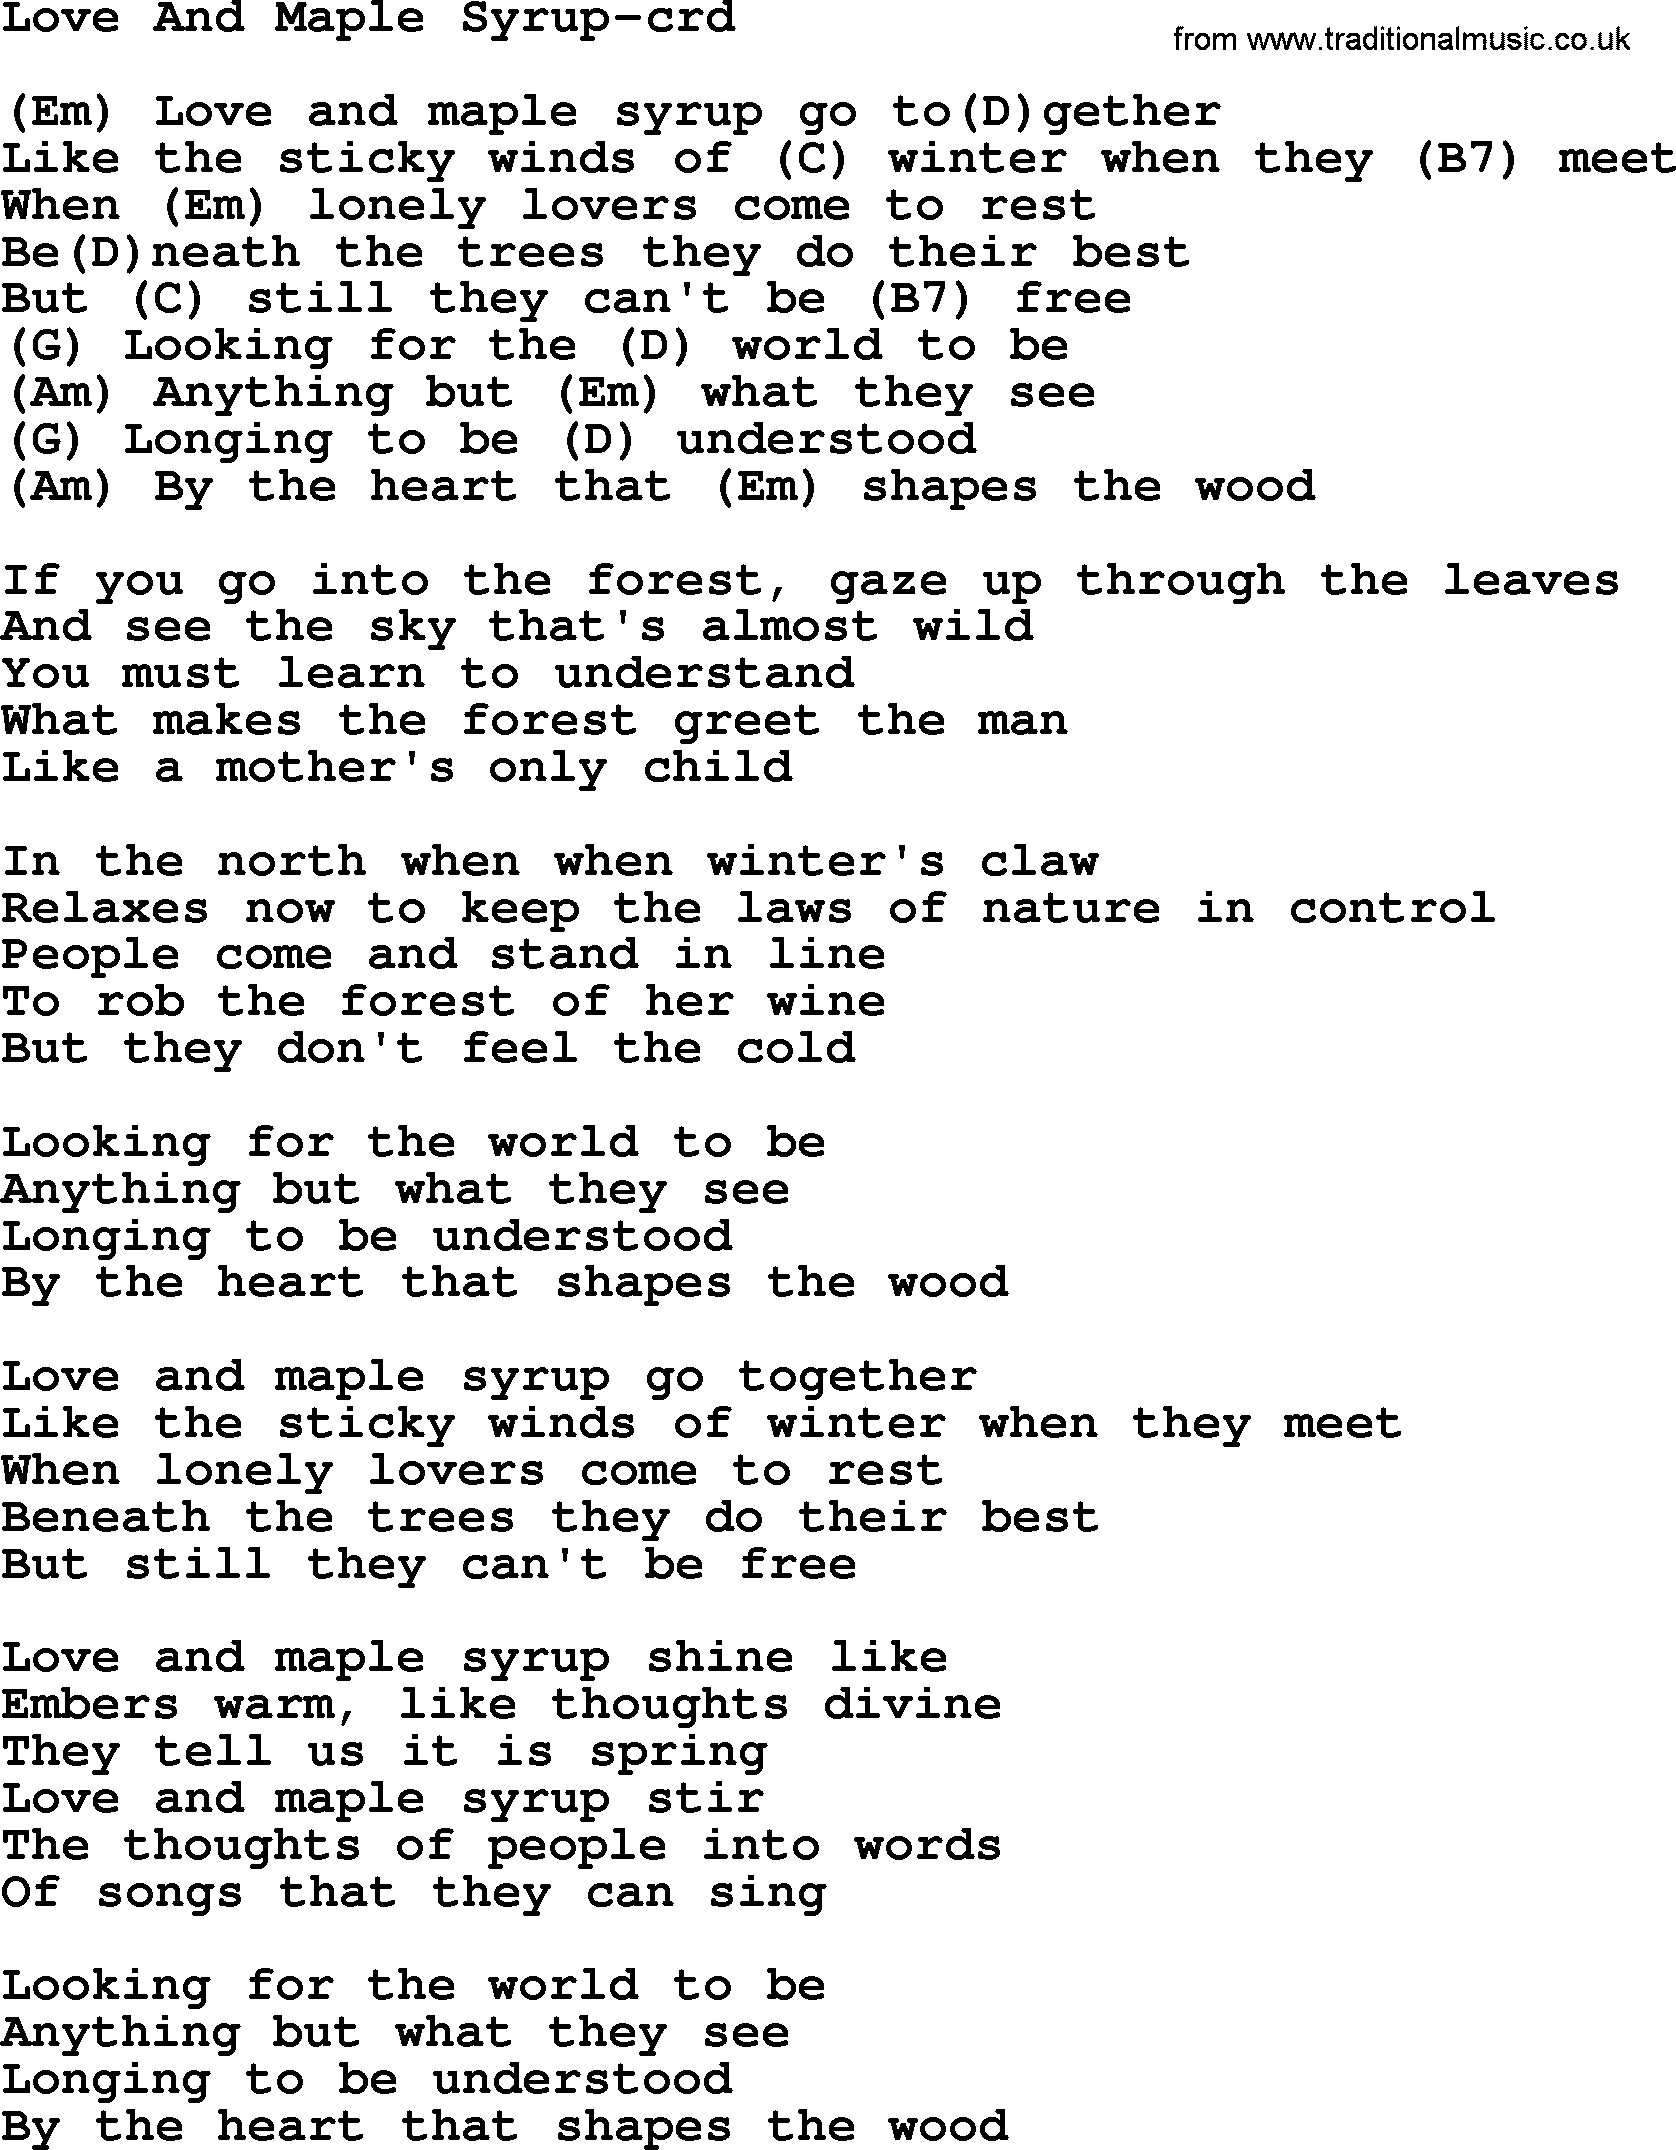 Love And Maple by Gordon Lightfoot, lyrics and chords